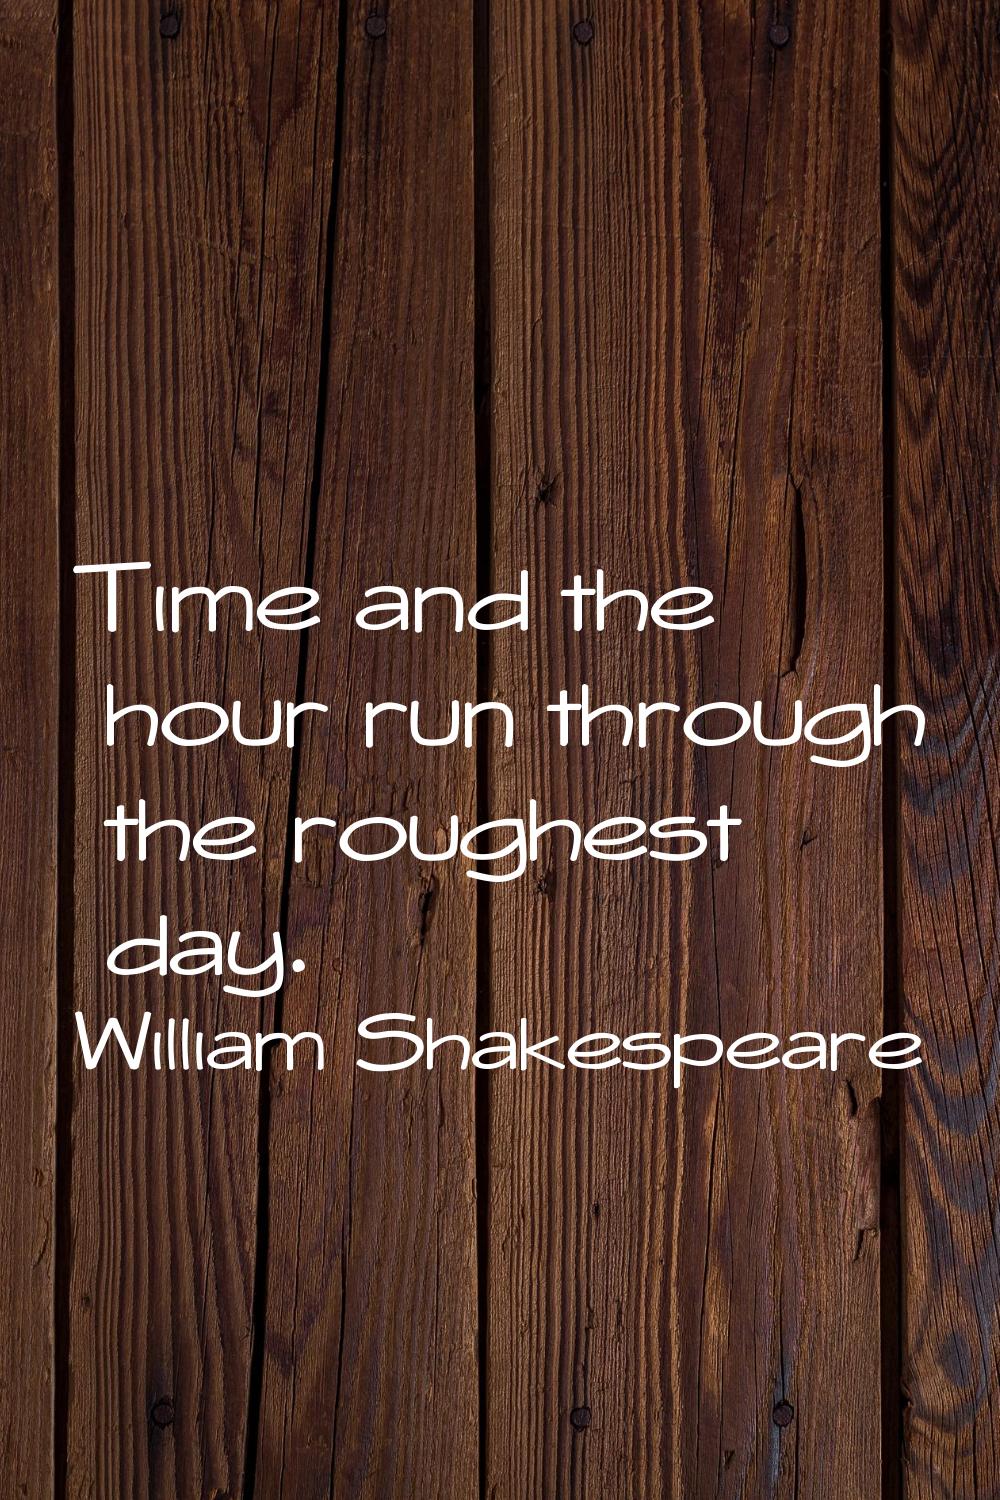 Time and the hour run through the roughest day.